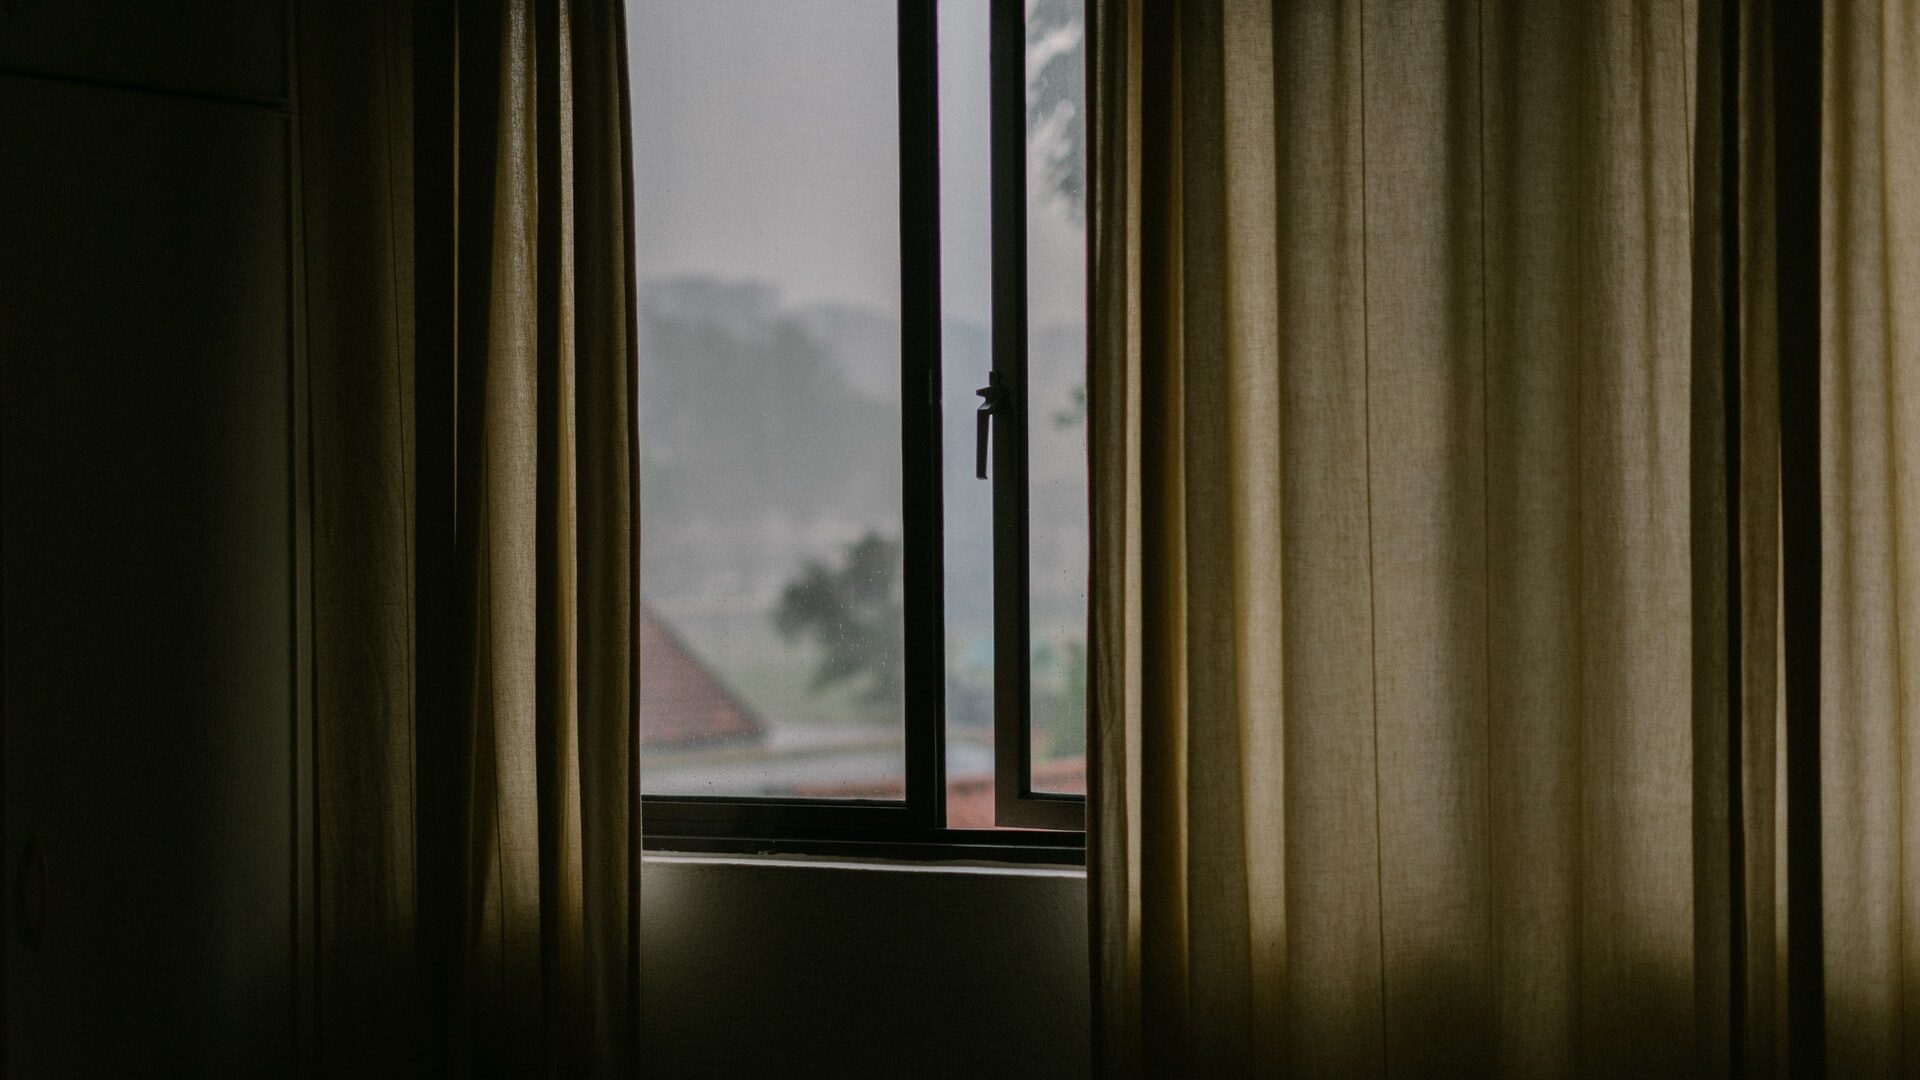 Half open curtains with an open window. It's a grey and rainy day outside.